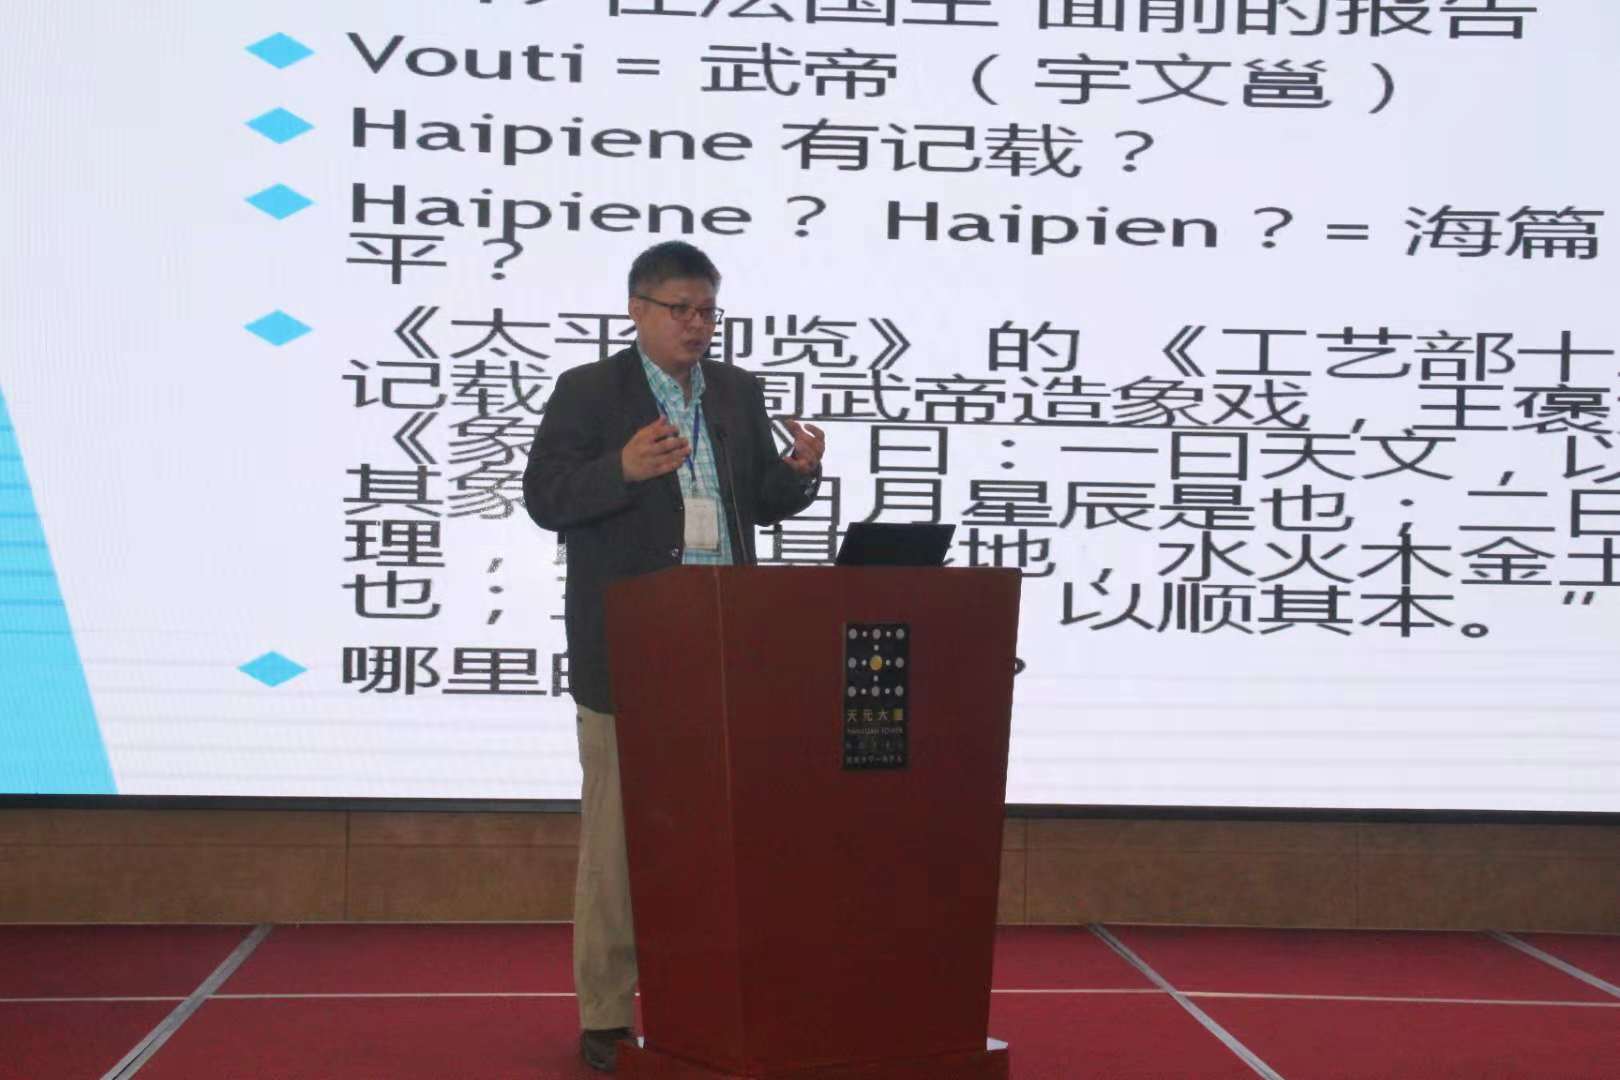 Presenting a paper on Xiangqi History in 2018 at the annual Hangzhou Chess Conference